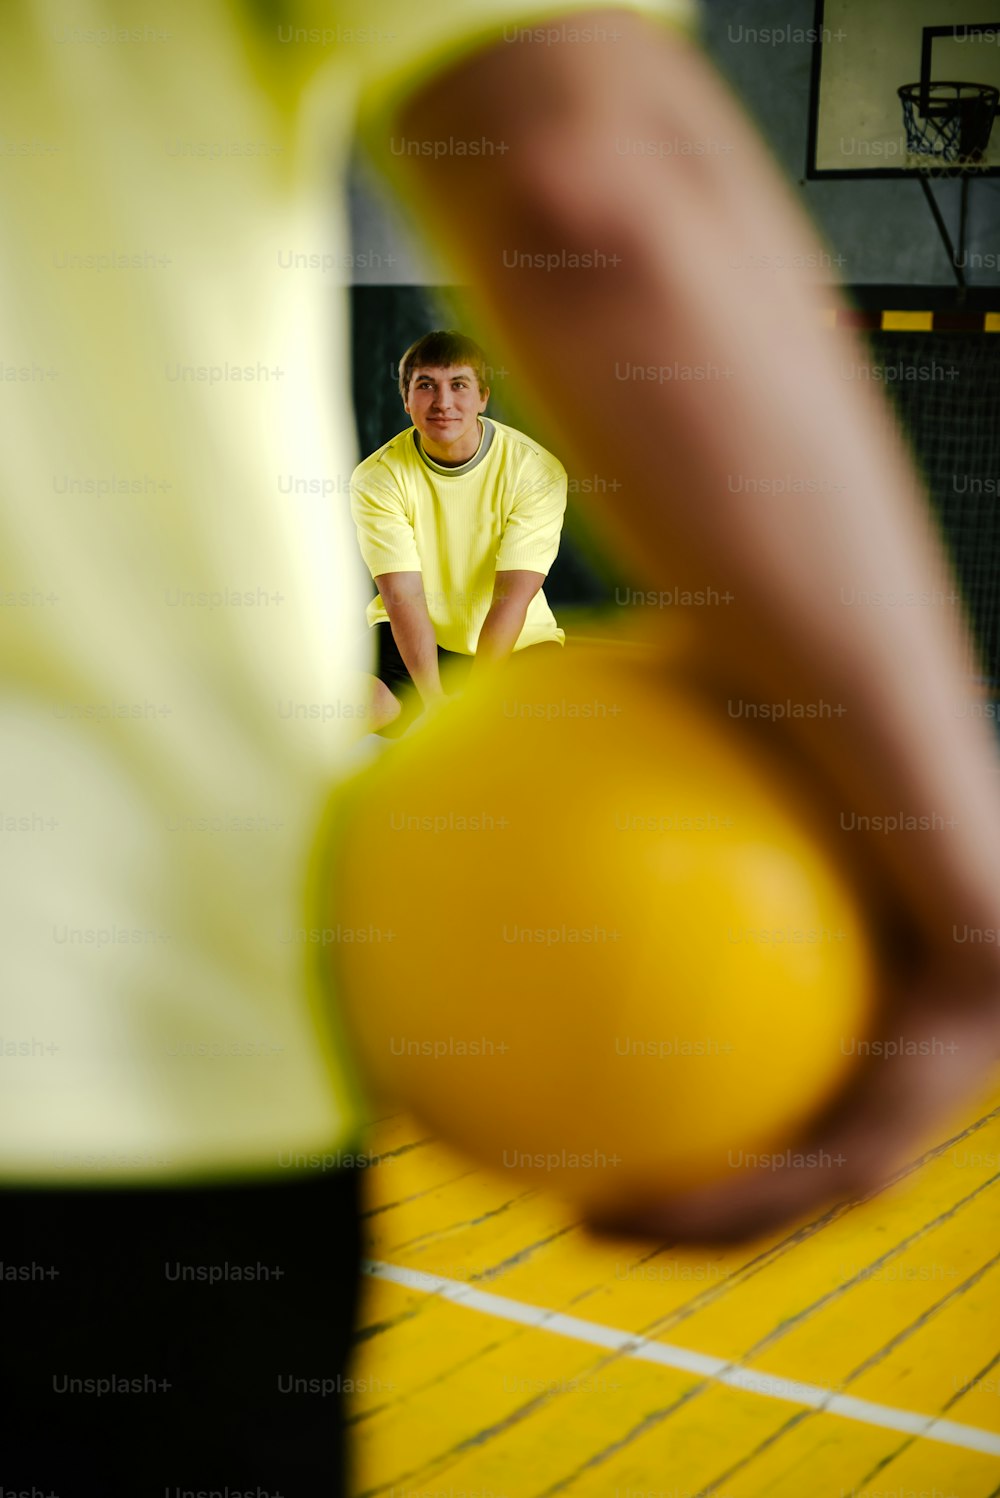 a man in a yellow shirt holding a yellow ball